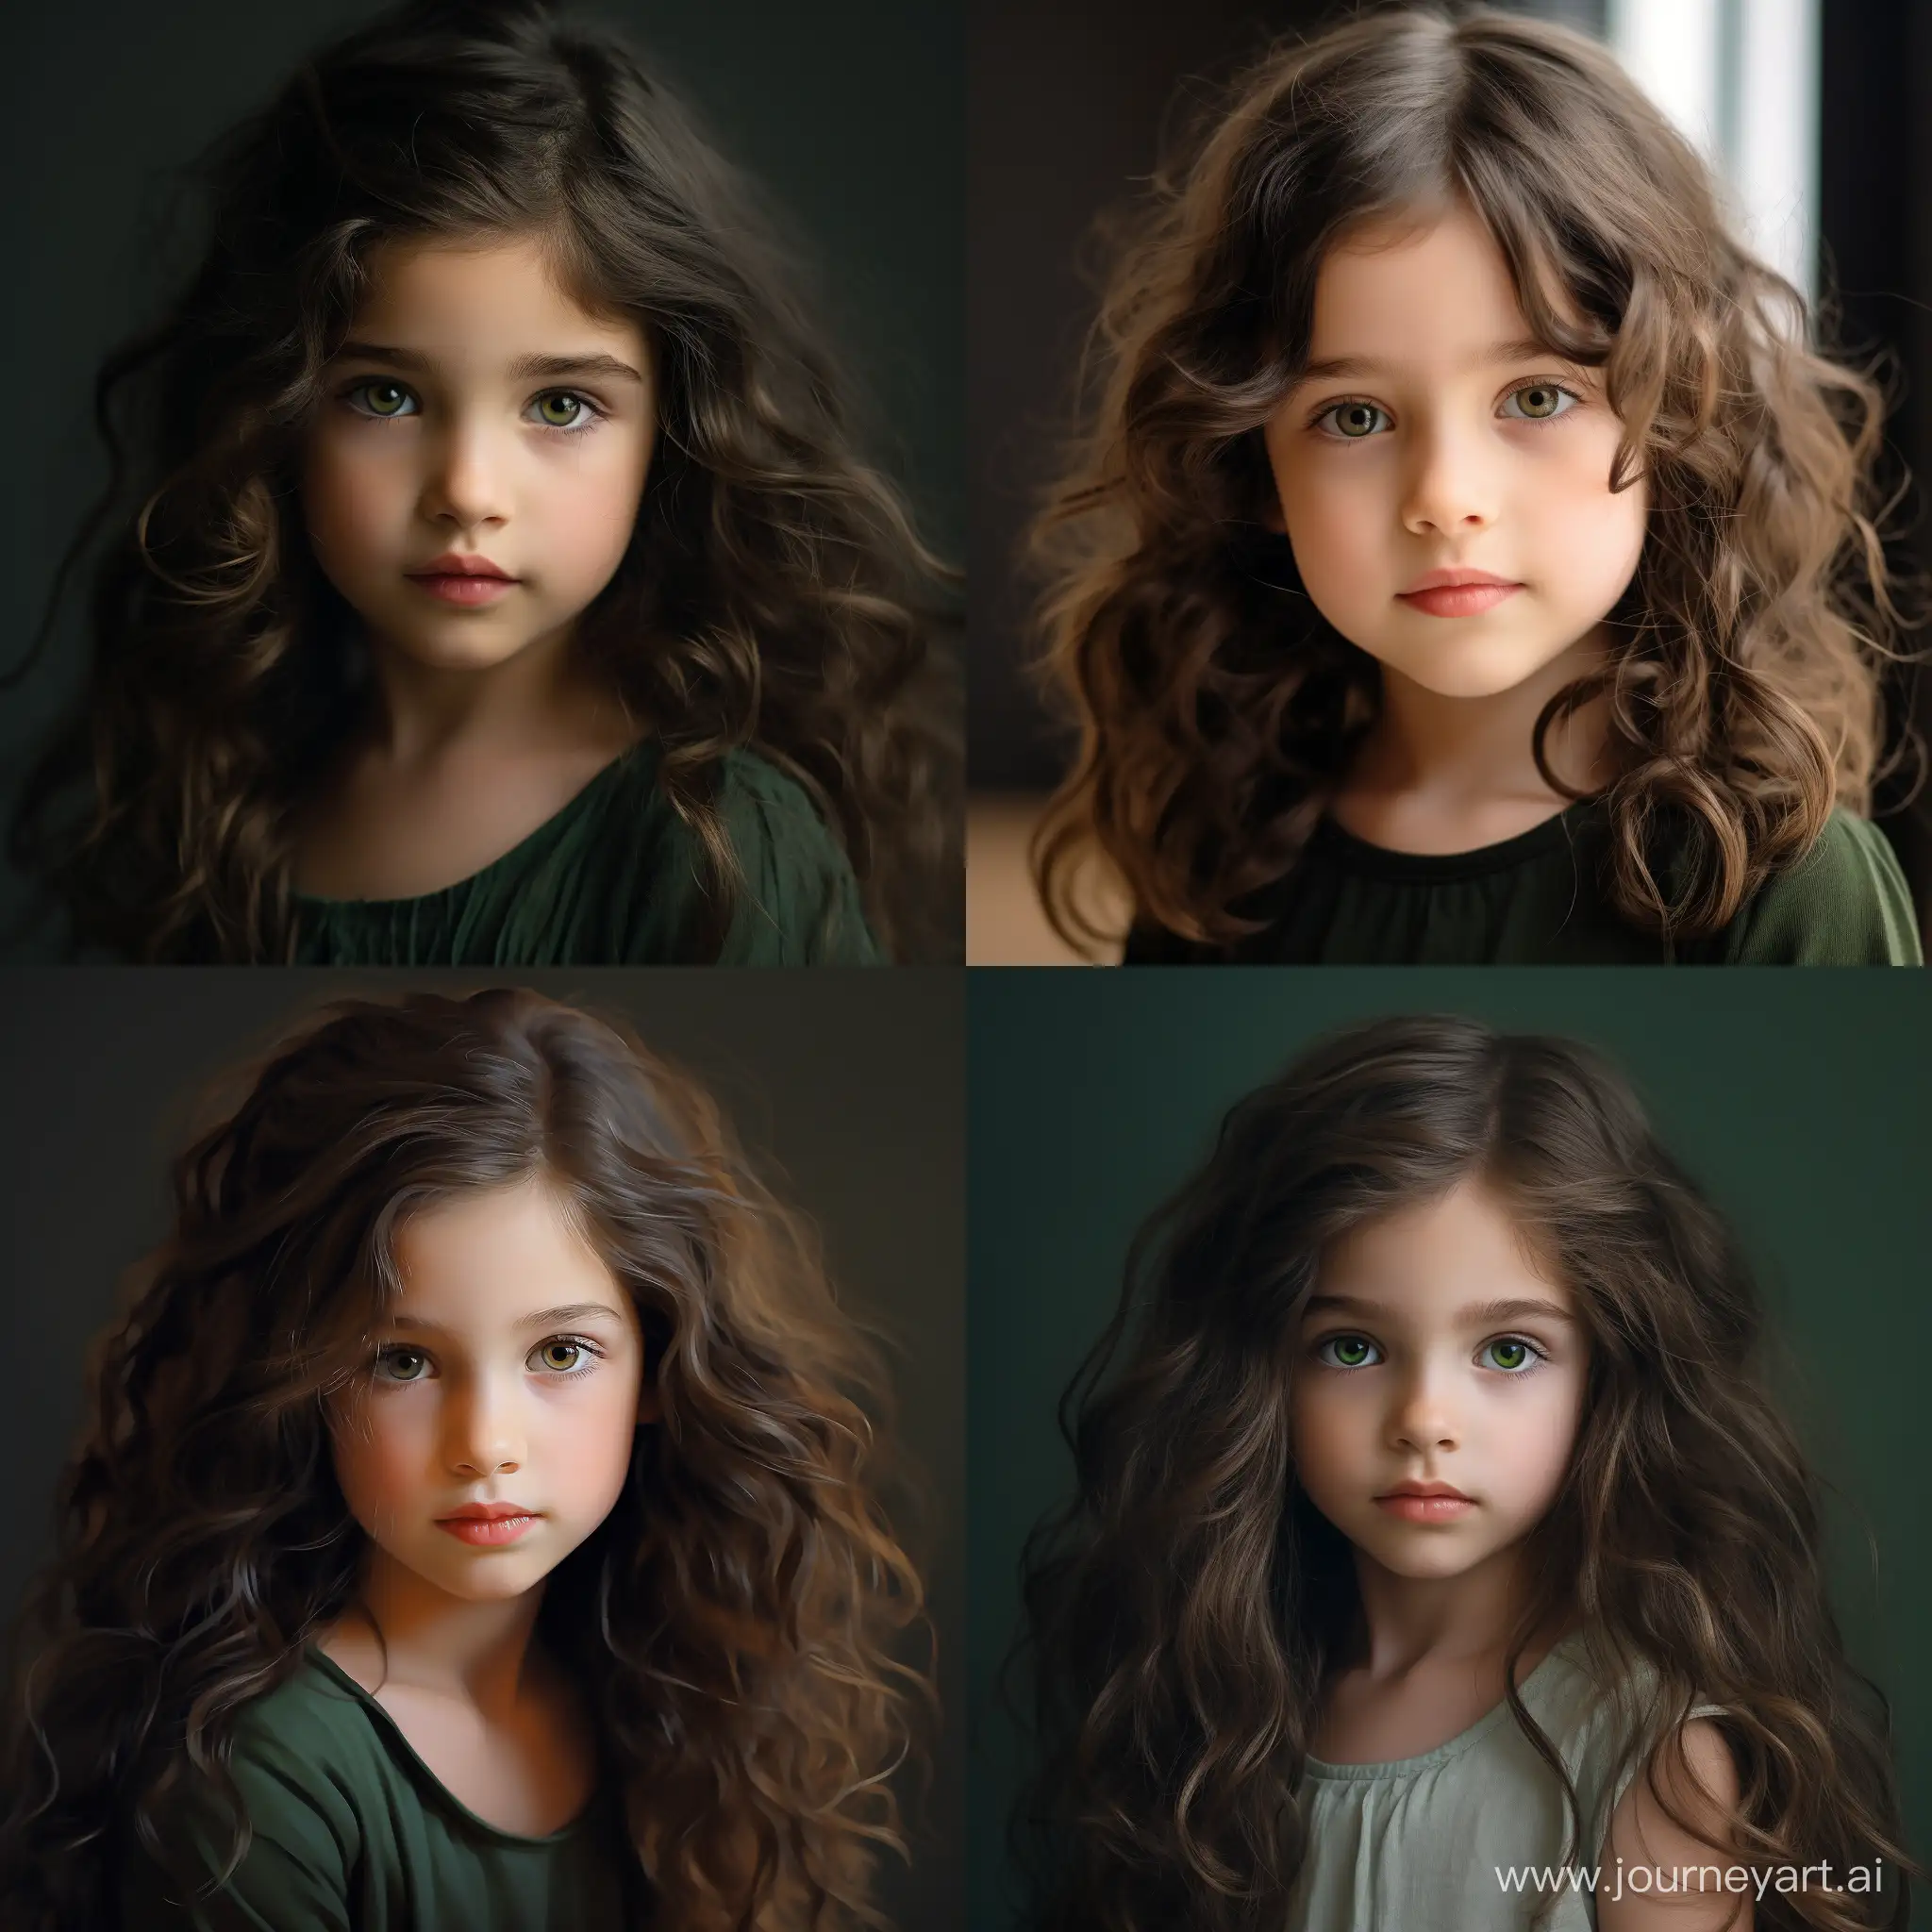 a girl with dark hair and green eyes. She is 5 years old